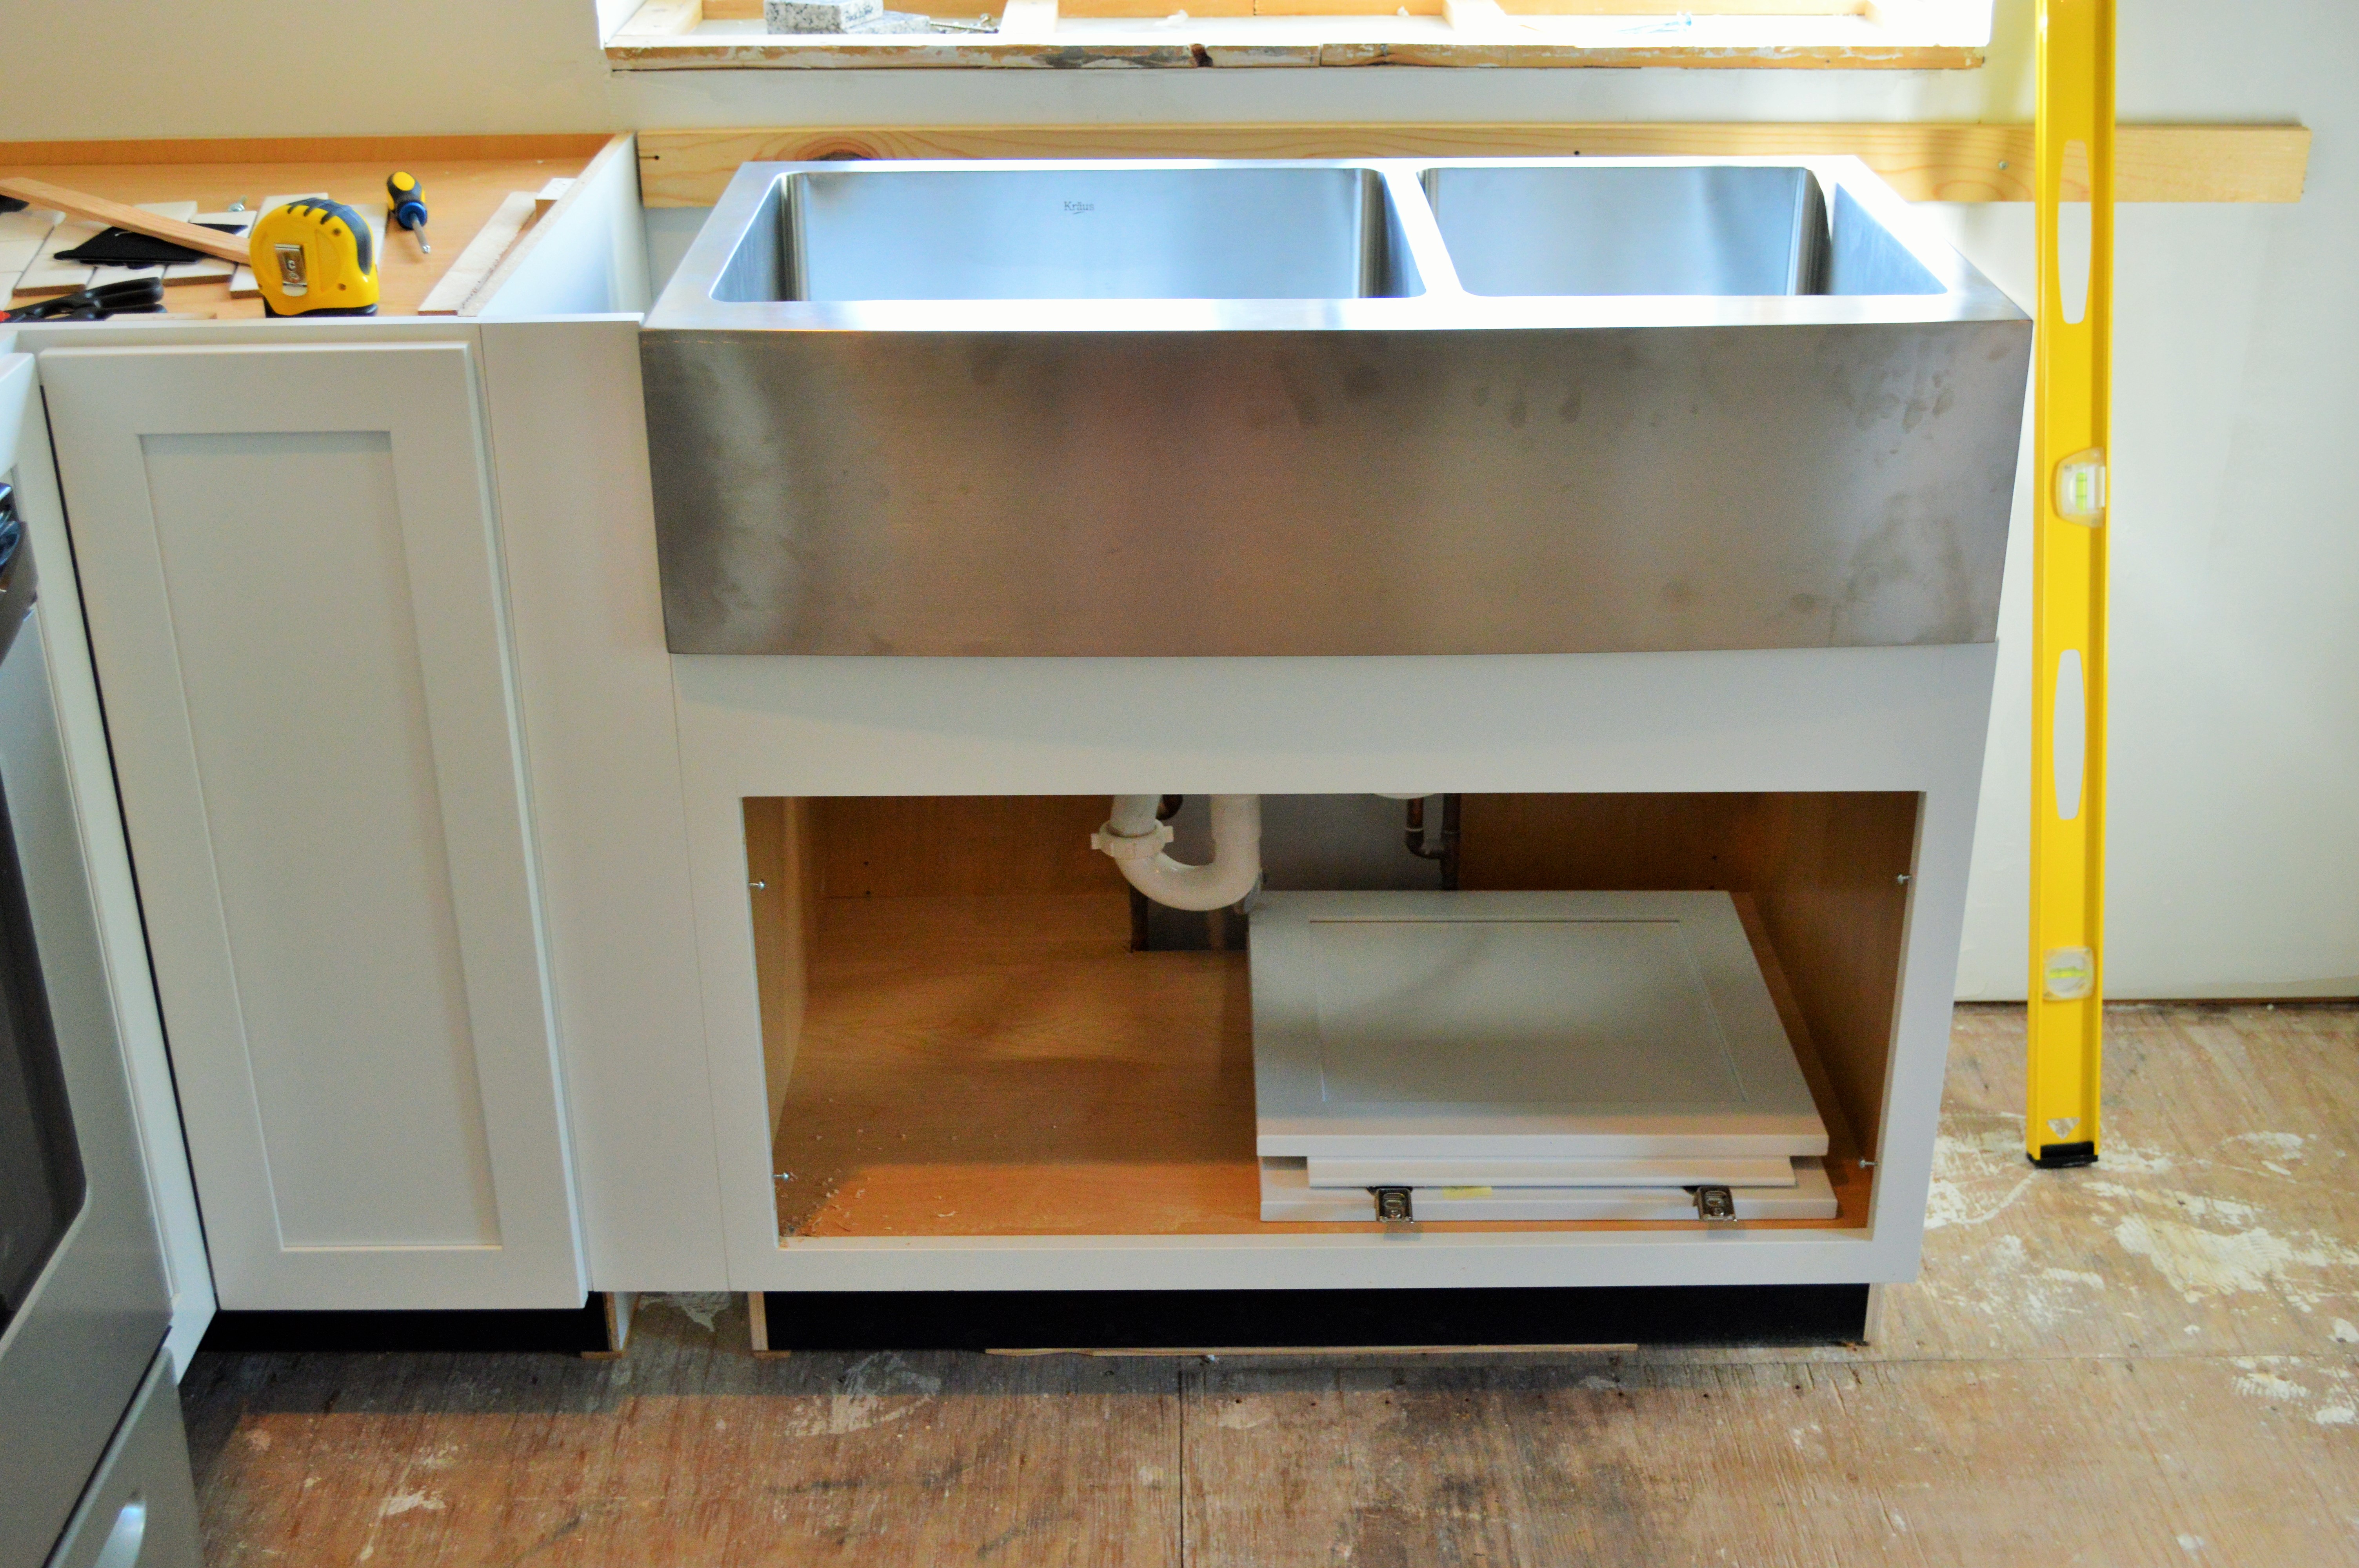 http://lovinghere.com/wp-content/uploads/2014/07/Apron-Sink-Ready-for-Installation.jpg